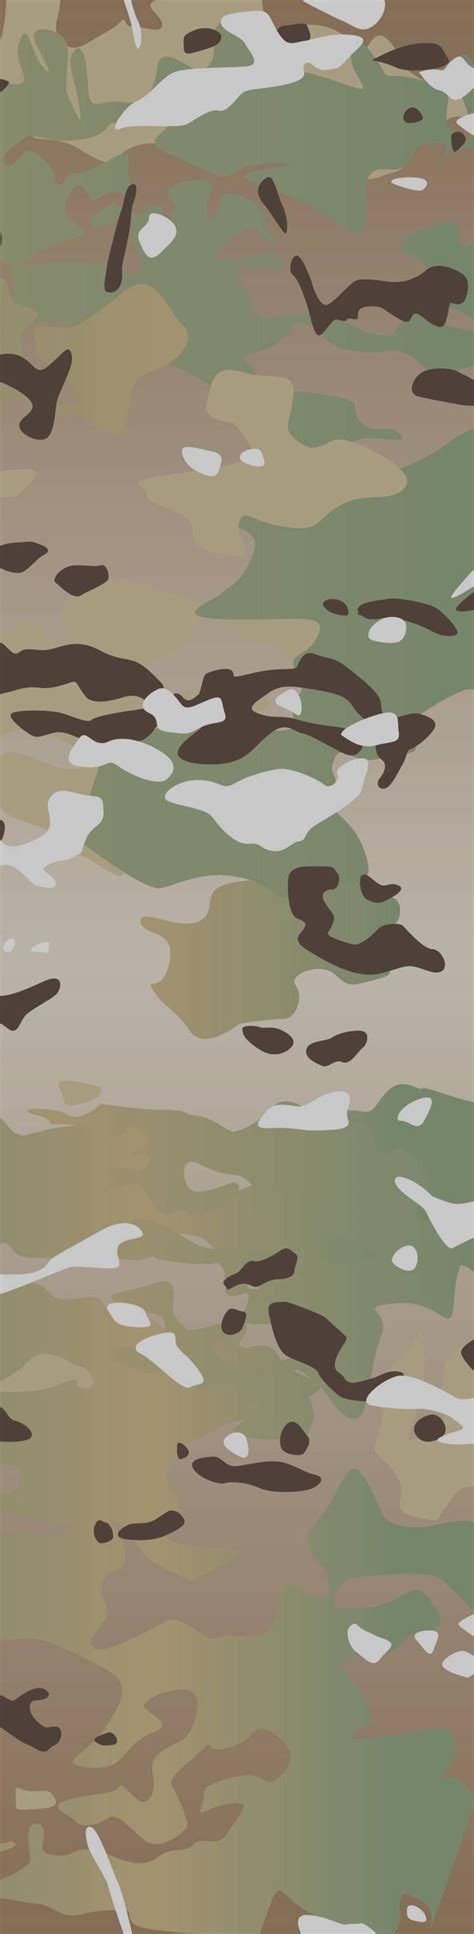 Original Multicam Vector Camouflage Pattern For Printing Etsy In 2020